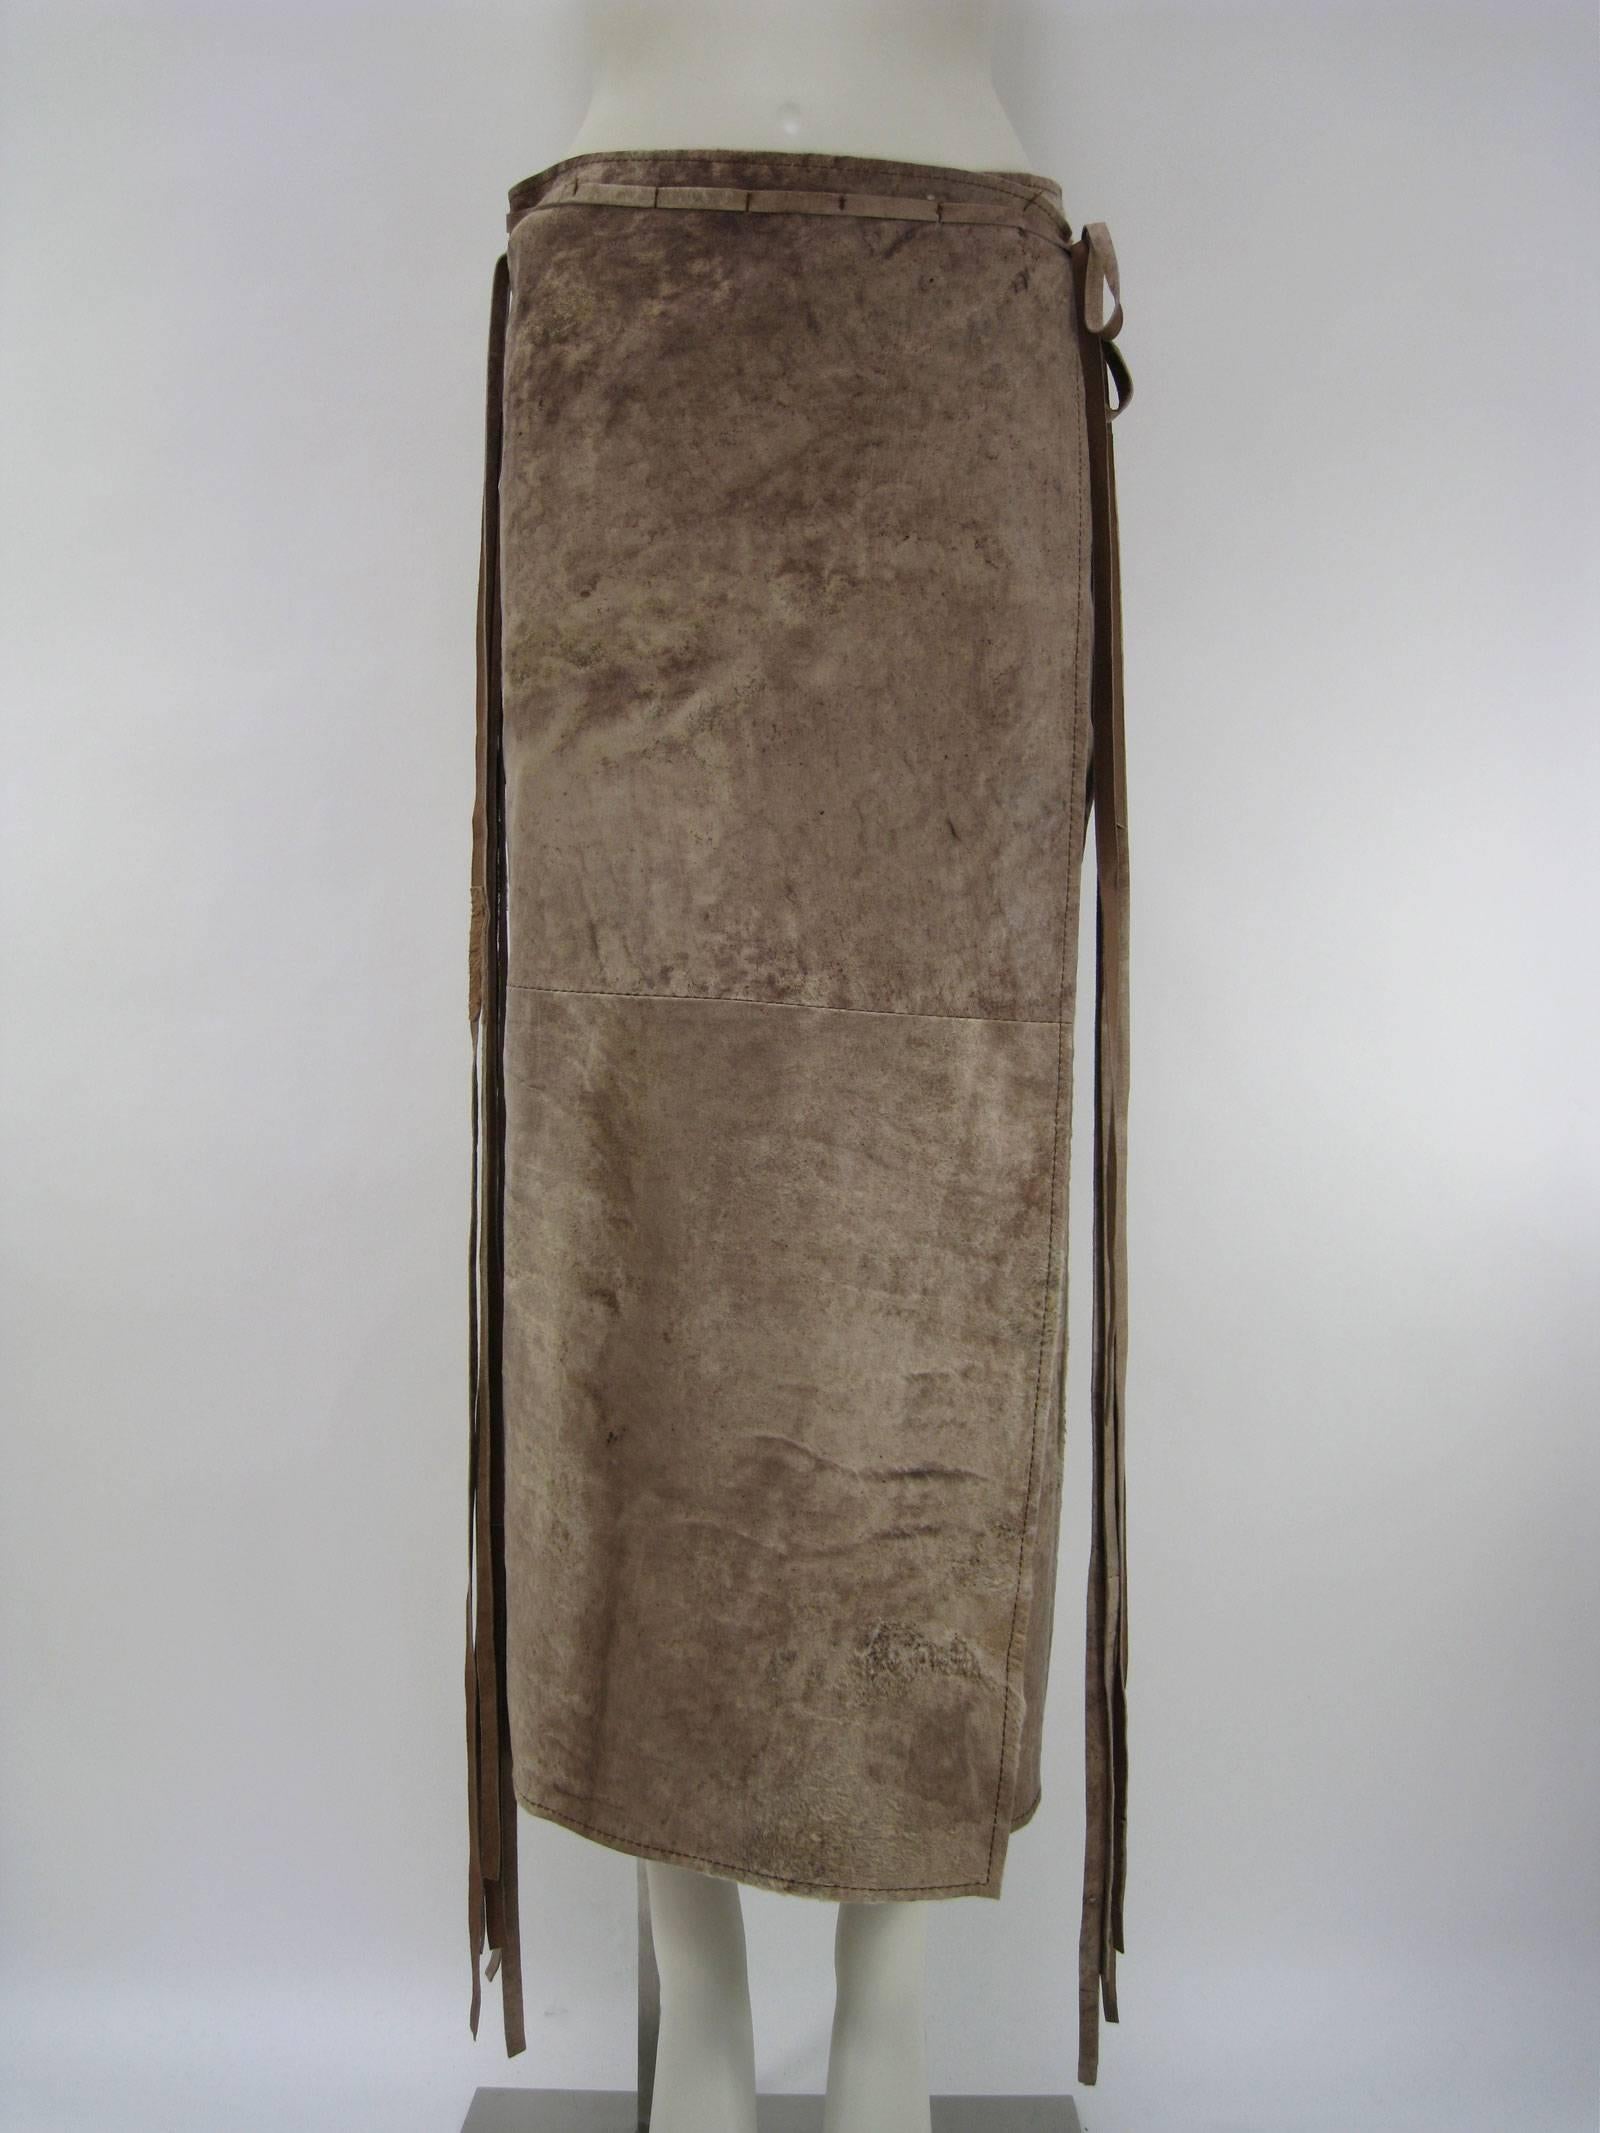 Unusual Ann Demeulemeester wrap skirt.
Very southwestern feeling in shades of tan with yellowish undertones.
Long mid calf length.
Distressed and weathered suede leather.
Pieced together to create very unique antiqued effect.
Sone pieces are